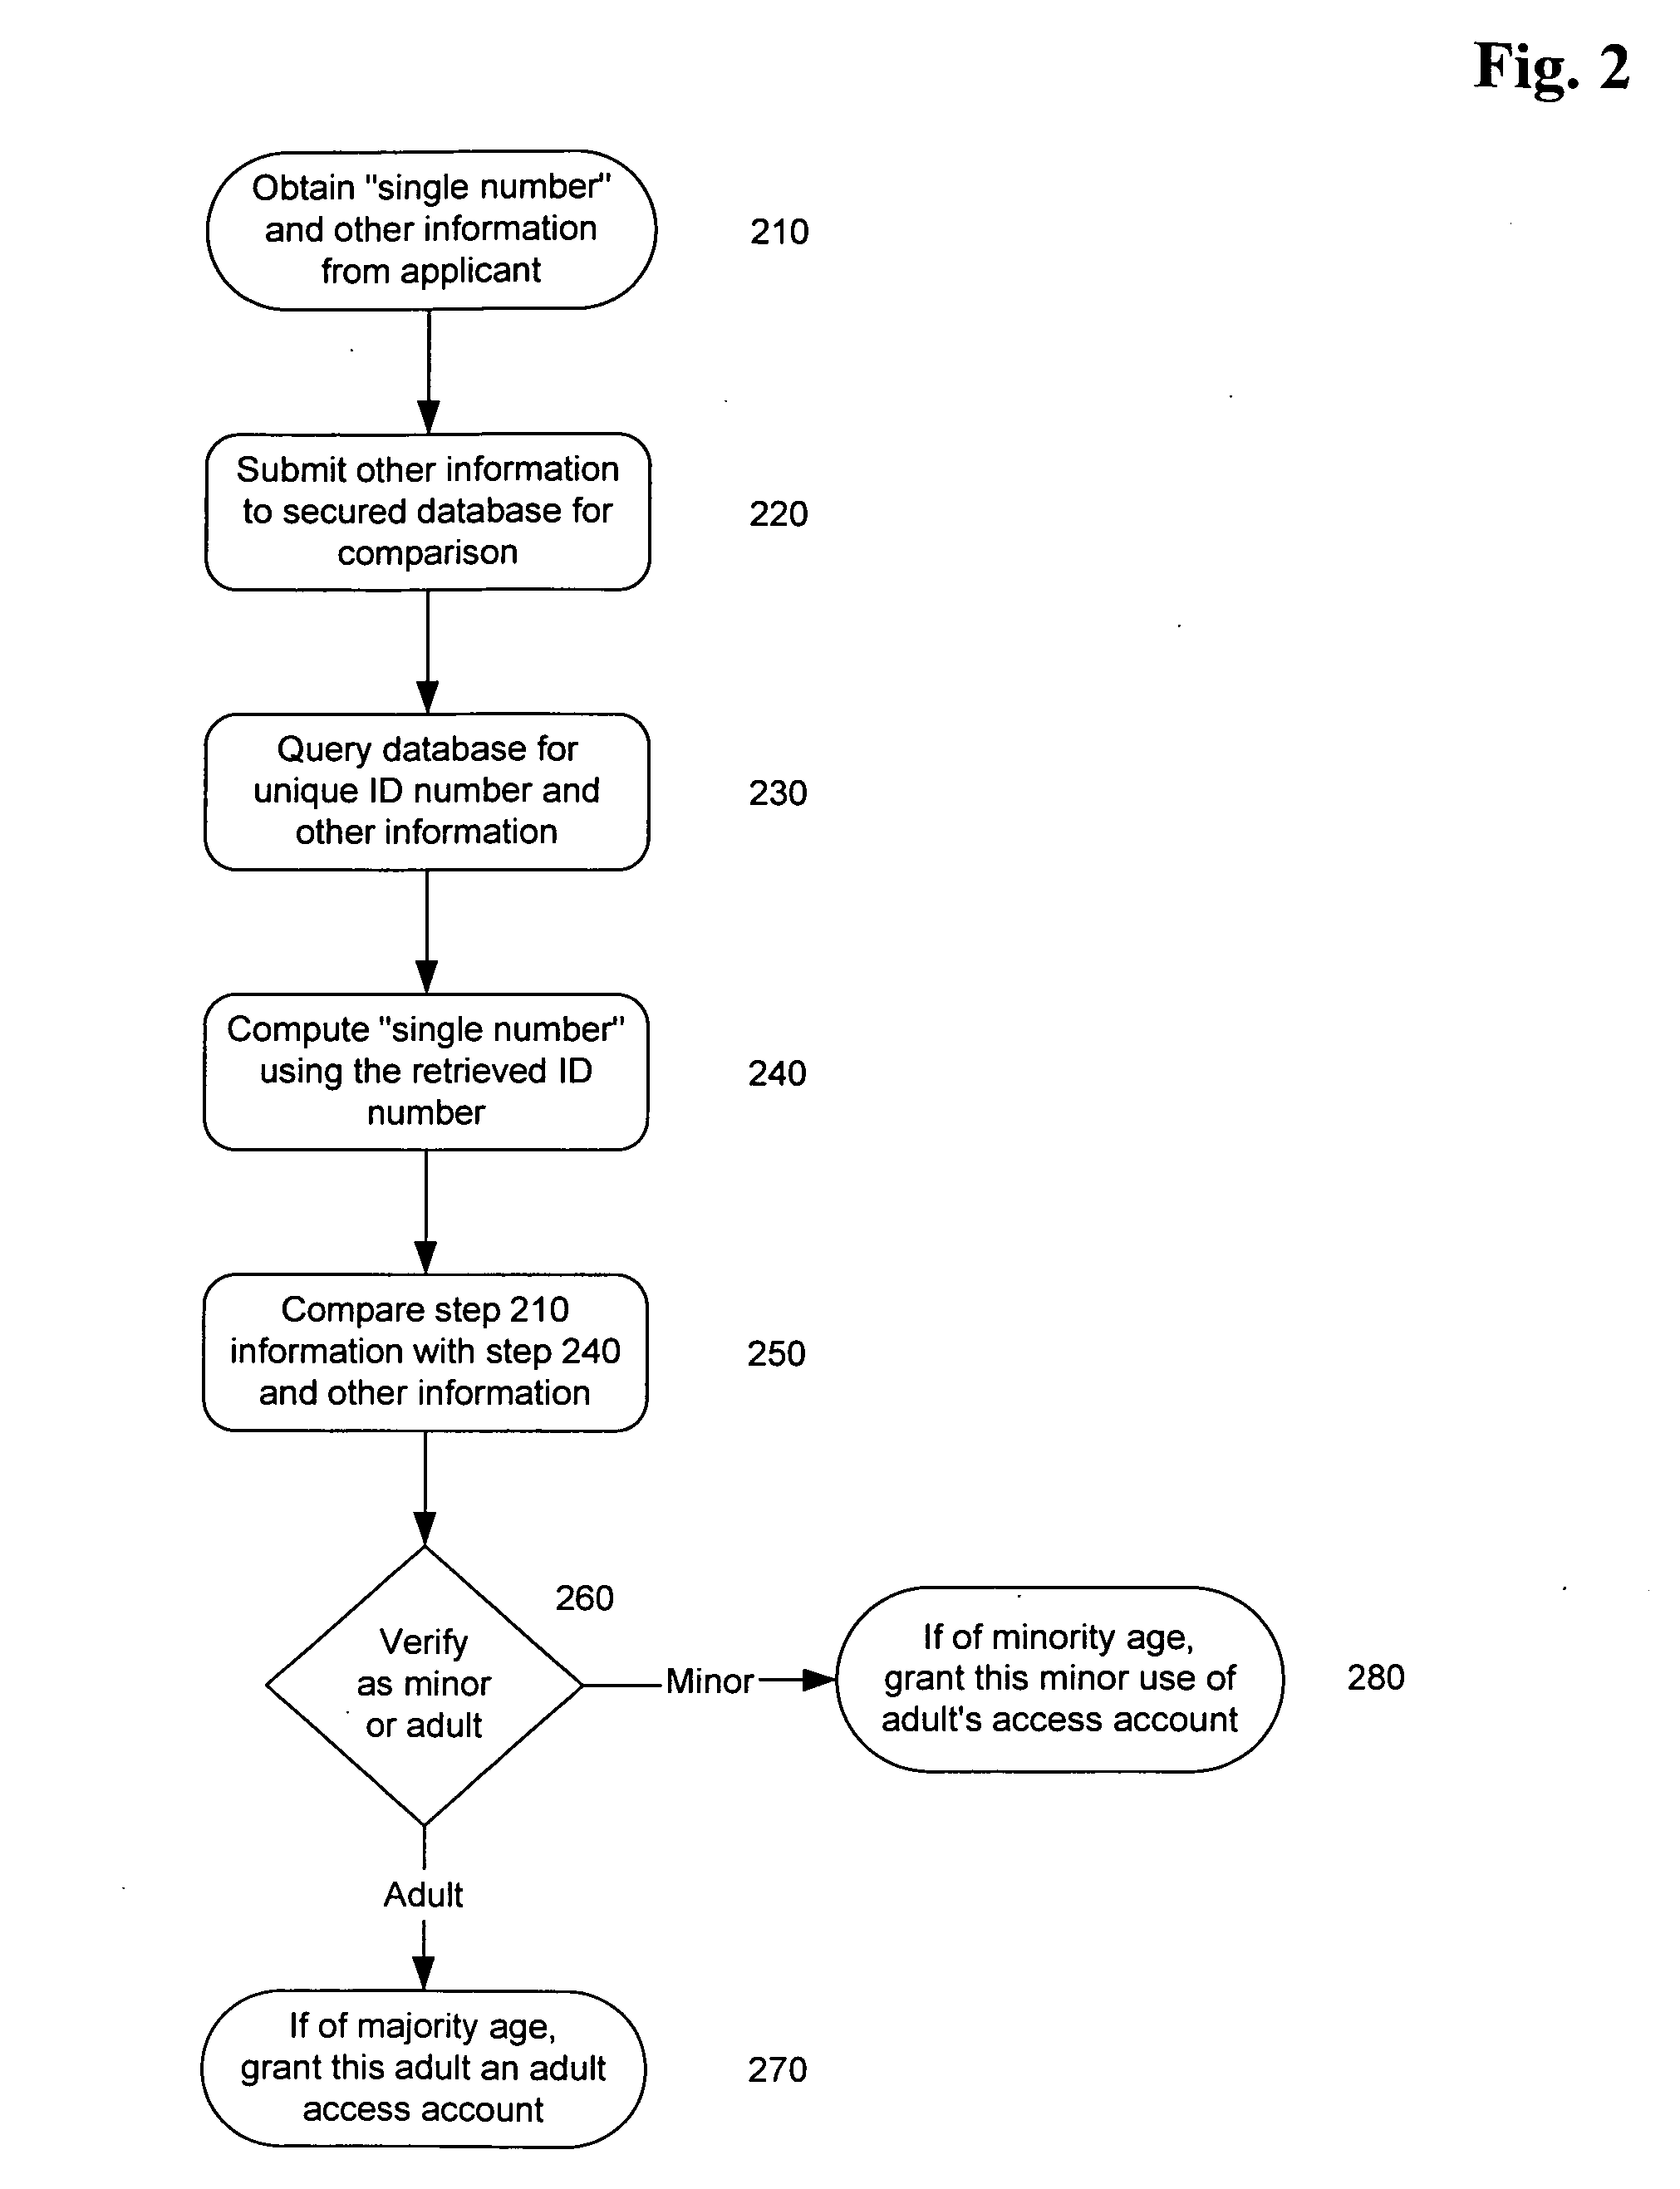 System and method for verifying the age and identity of individuals and limiting their access to appropriate material and situations